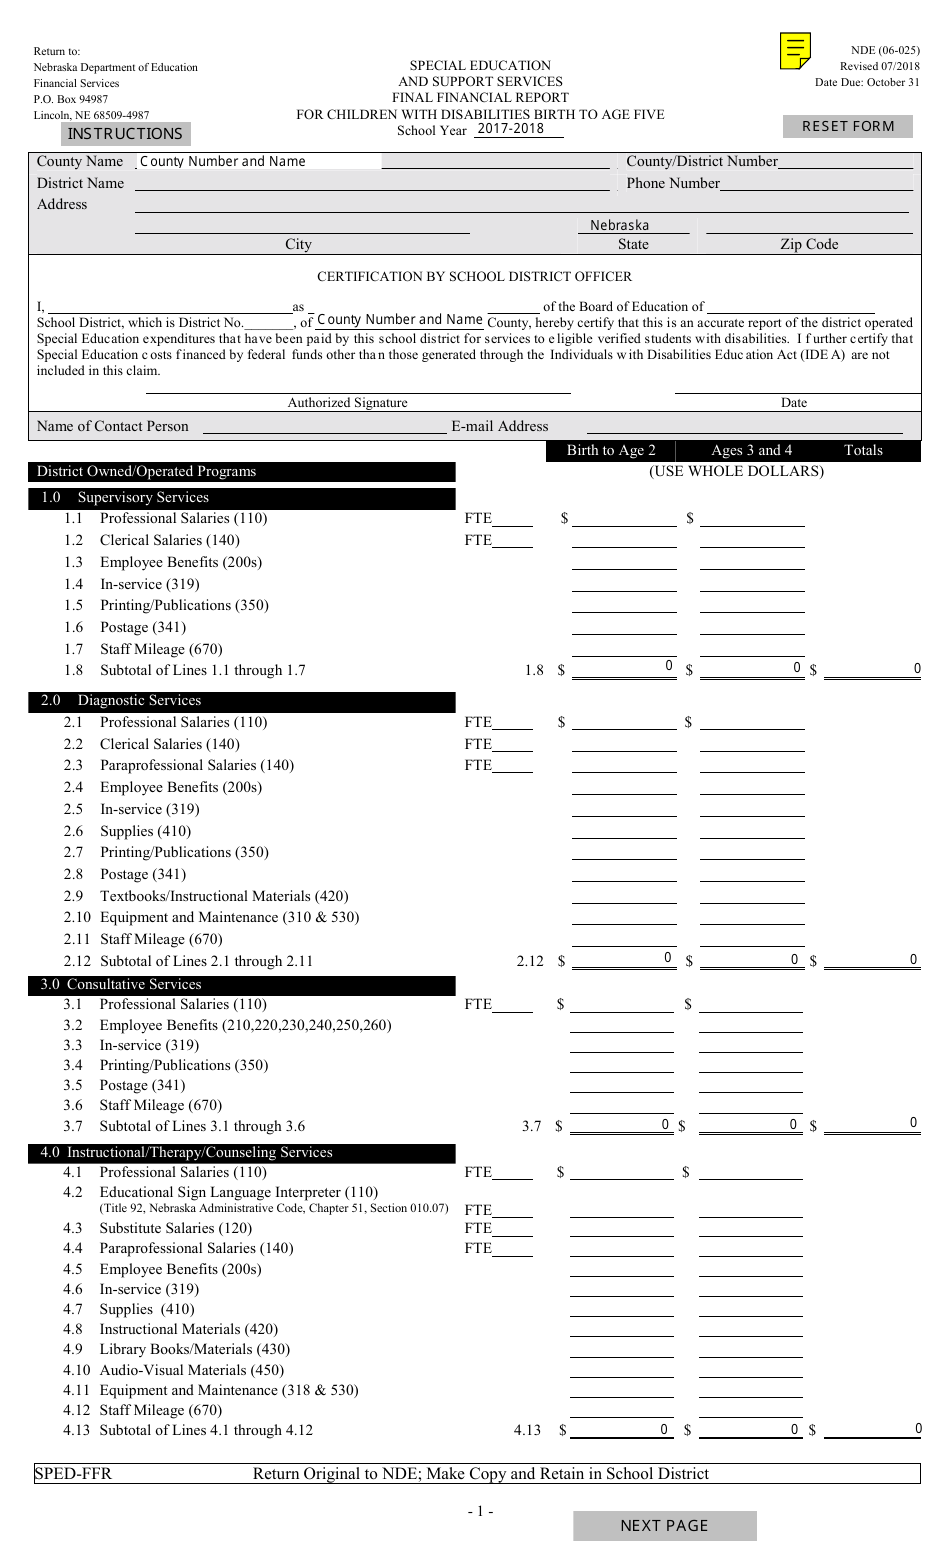 NDE Form 06-025 Final Financial Report for Children With Disabilities Birth to Age Five - Nebraska, Page 1